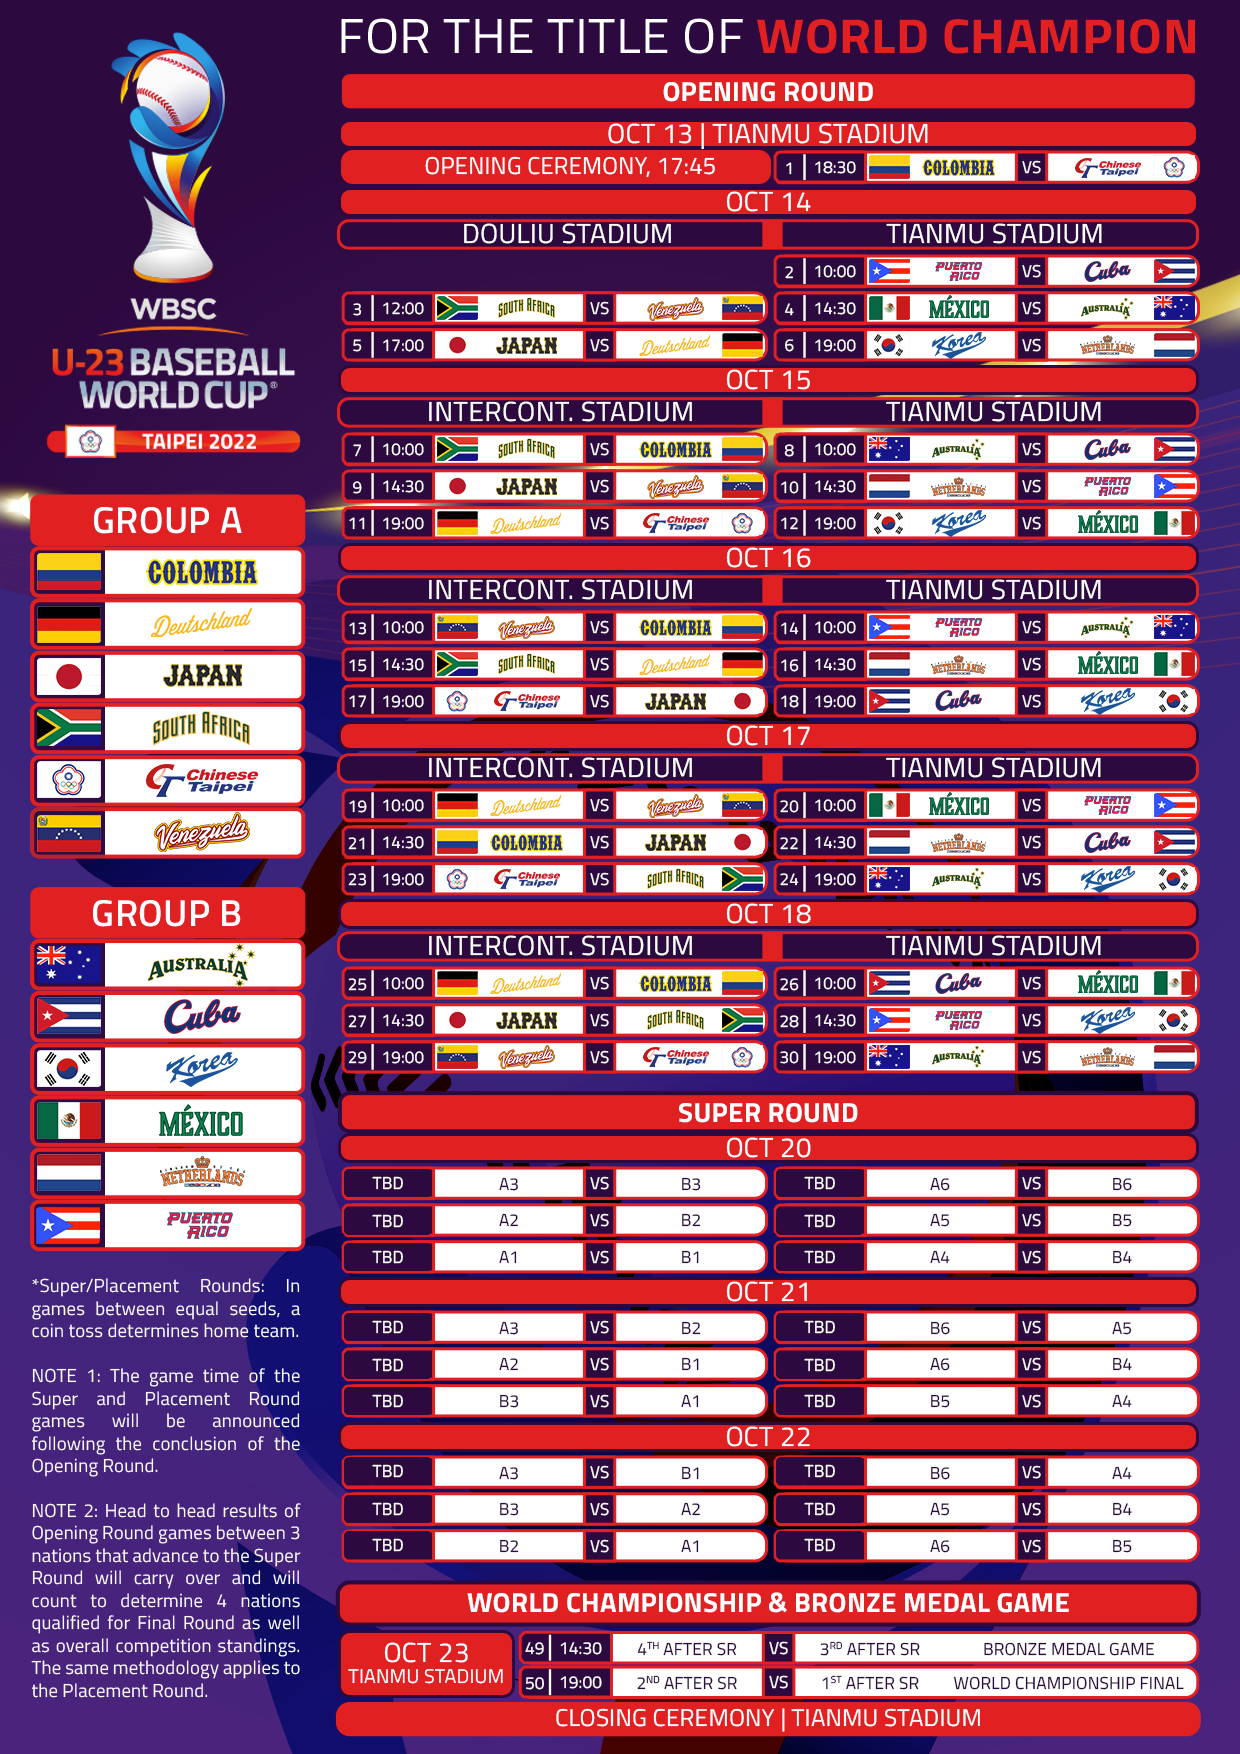 At the Under-23 Baseball World Cup, 50 games are scheduled over 11 days ©WBSC